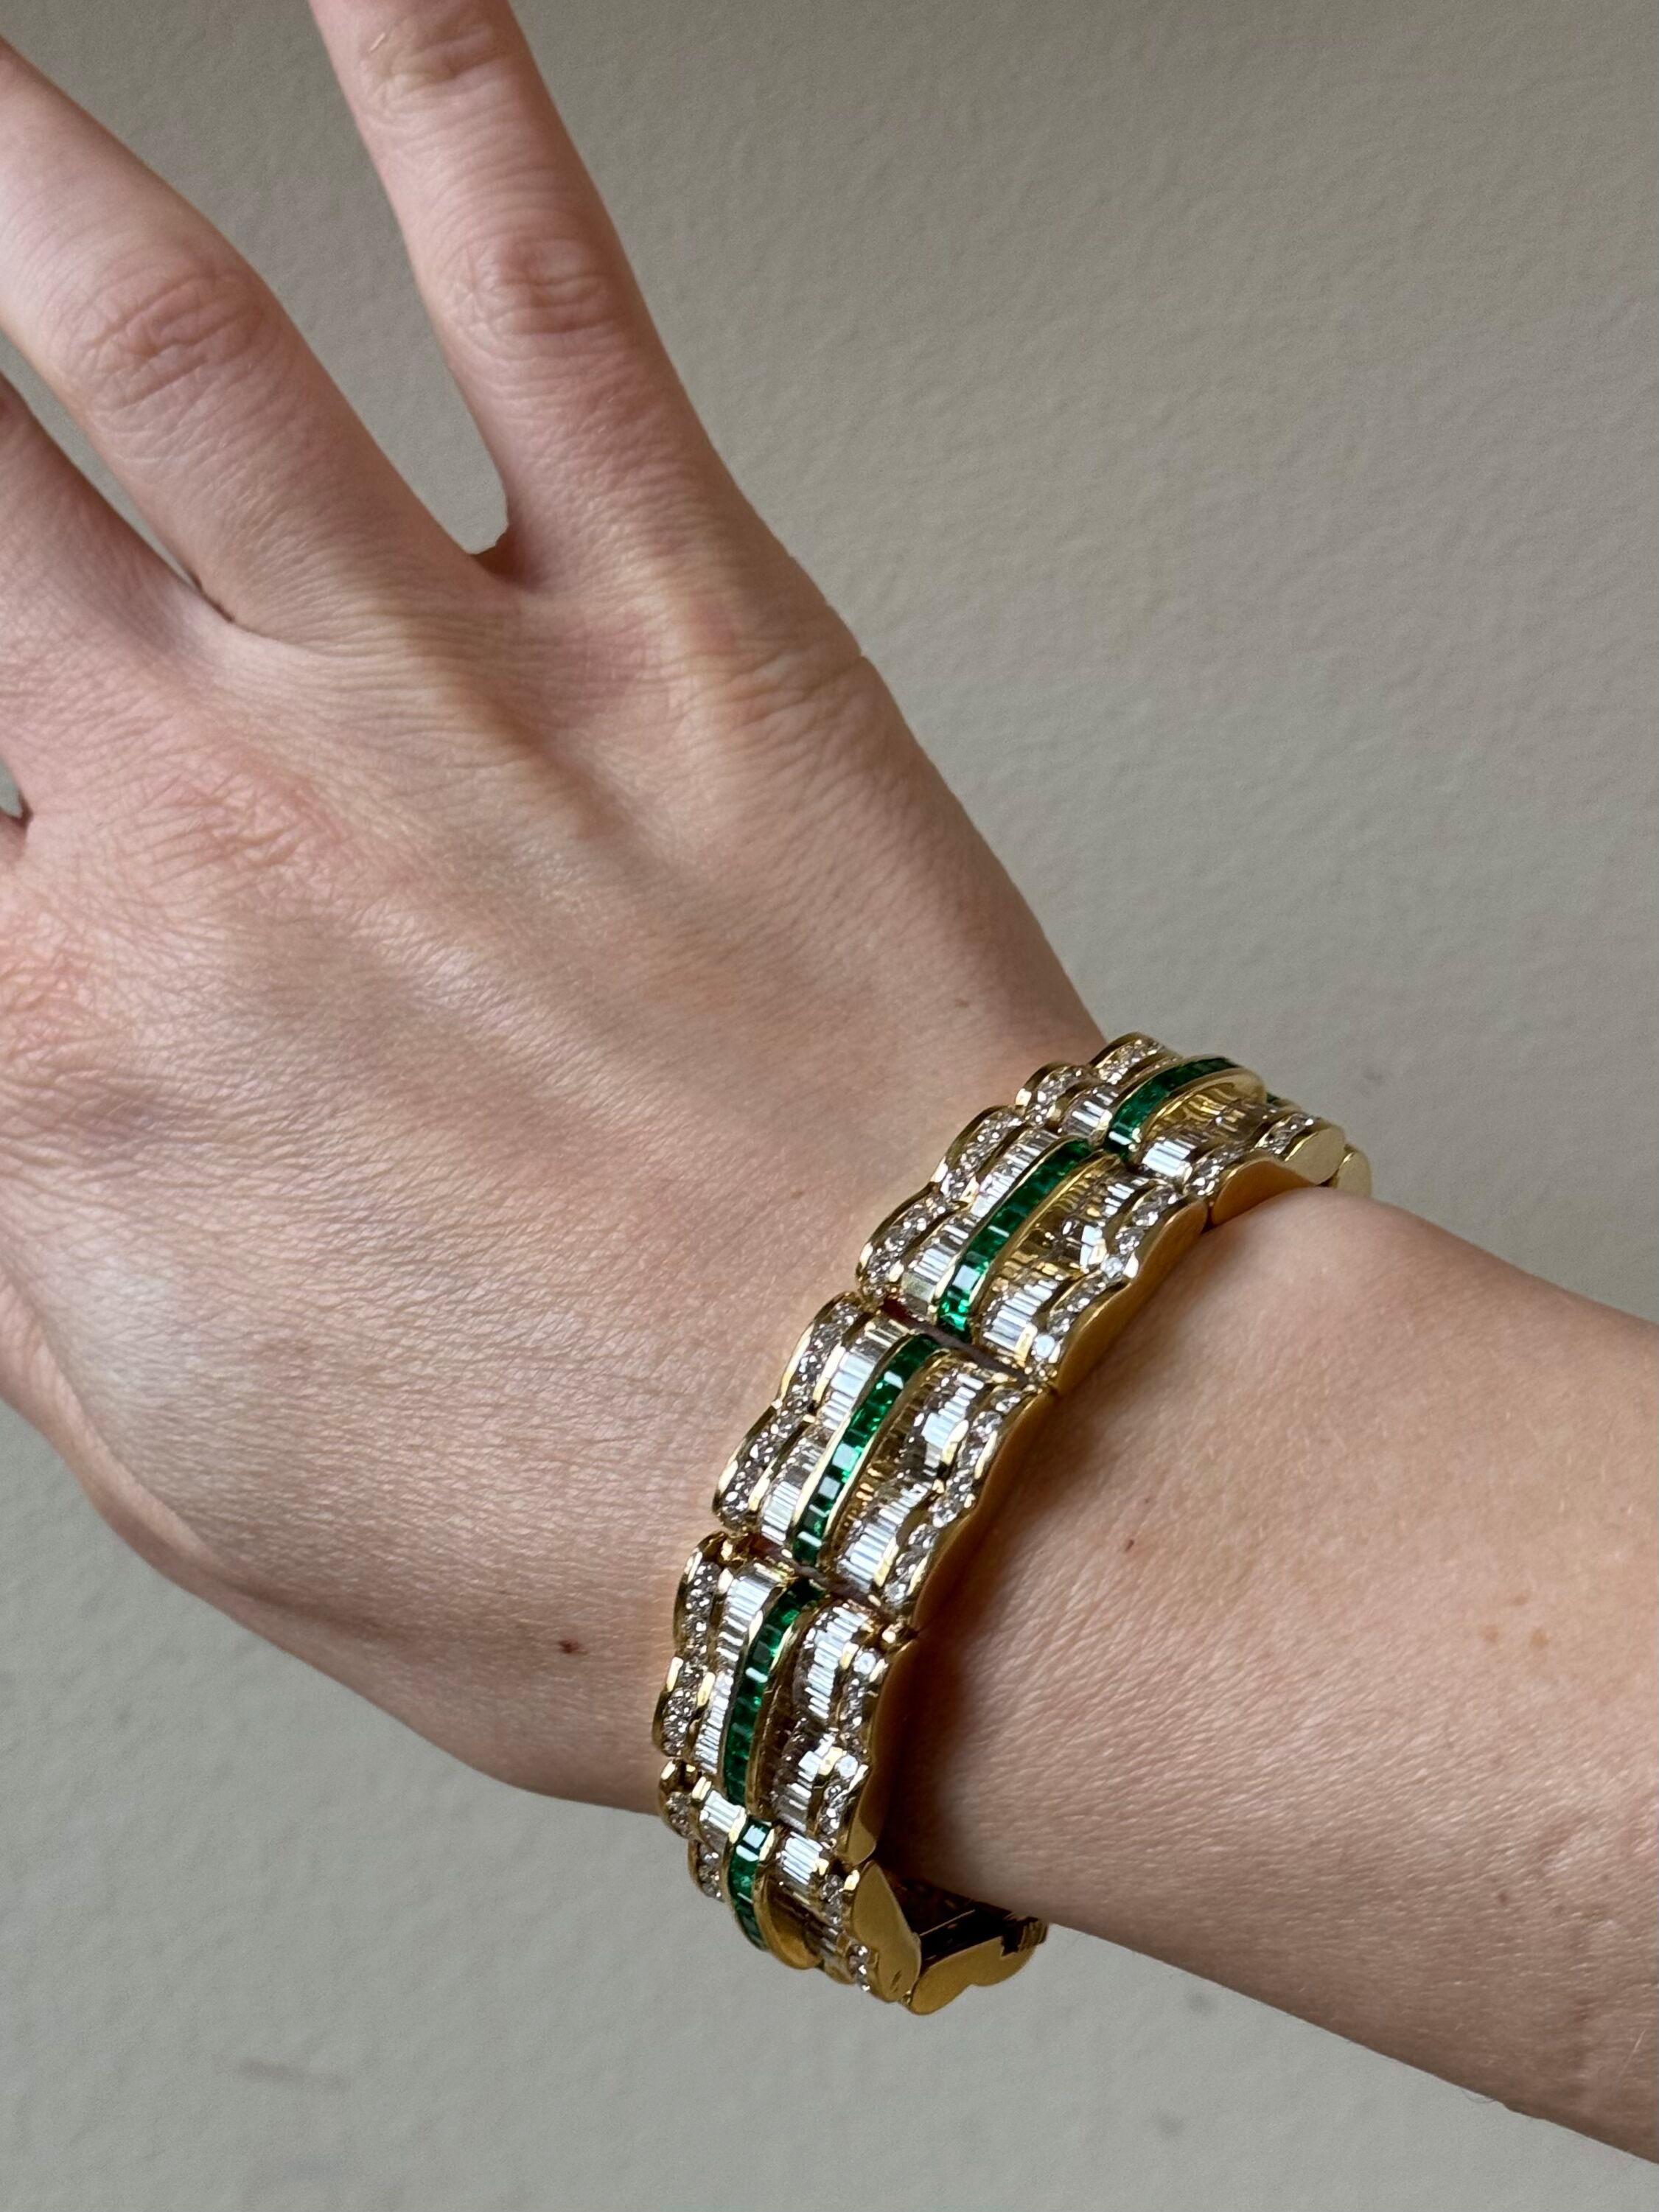 An impressive 18k yellow gold bracelet by Charles Krypell, adorned with an approximately 18 carats in baguette and round diamonds, G/VS, and emeralds. Bracelet is 7 1/18